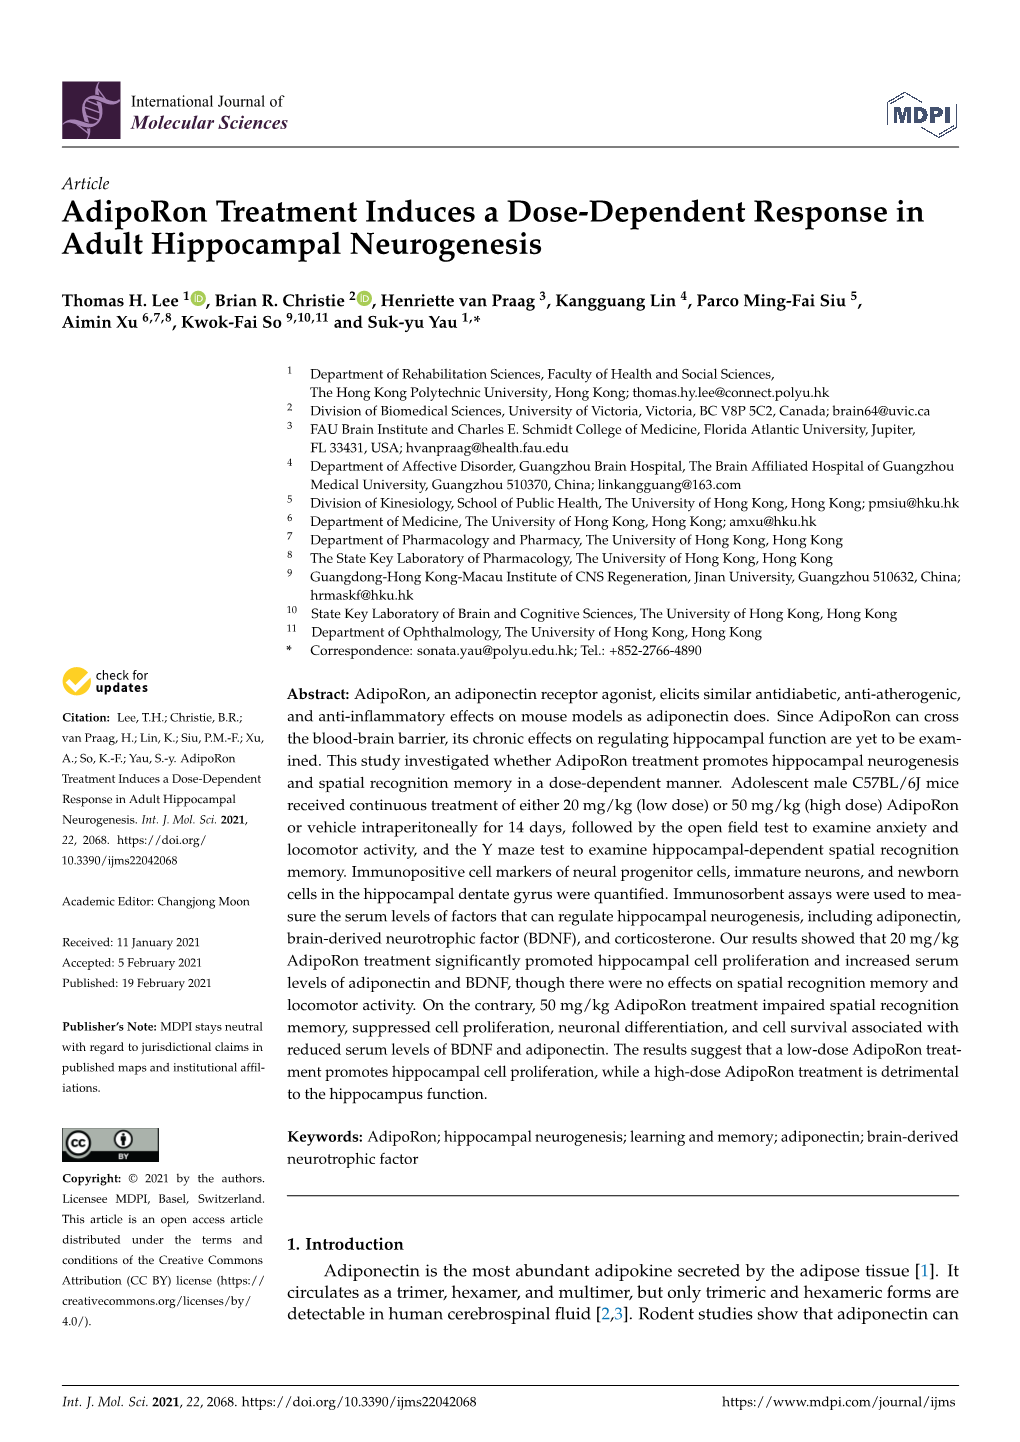 Adiporon Treatment Induces a Dose-Dependent Response in Adult Hippocampal Neurogenesis